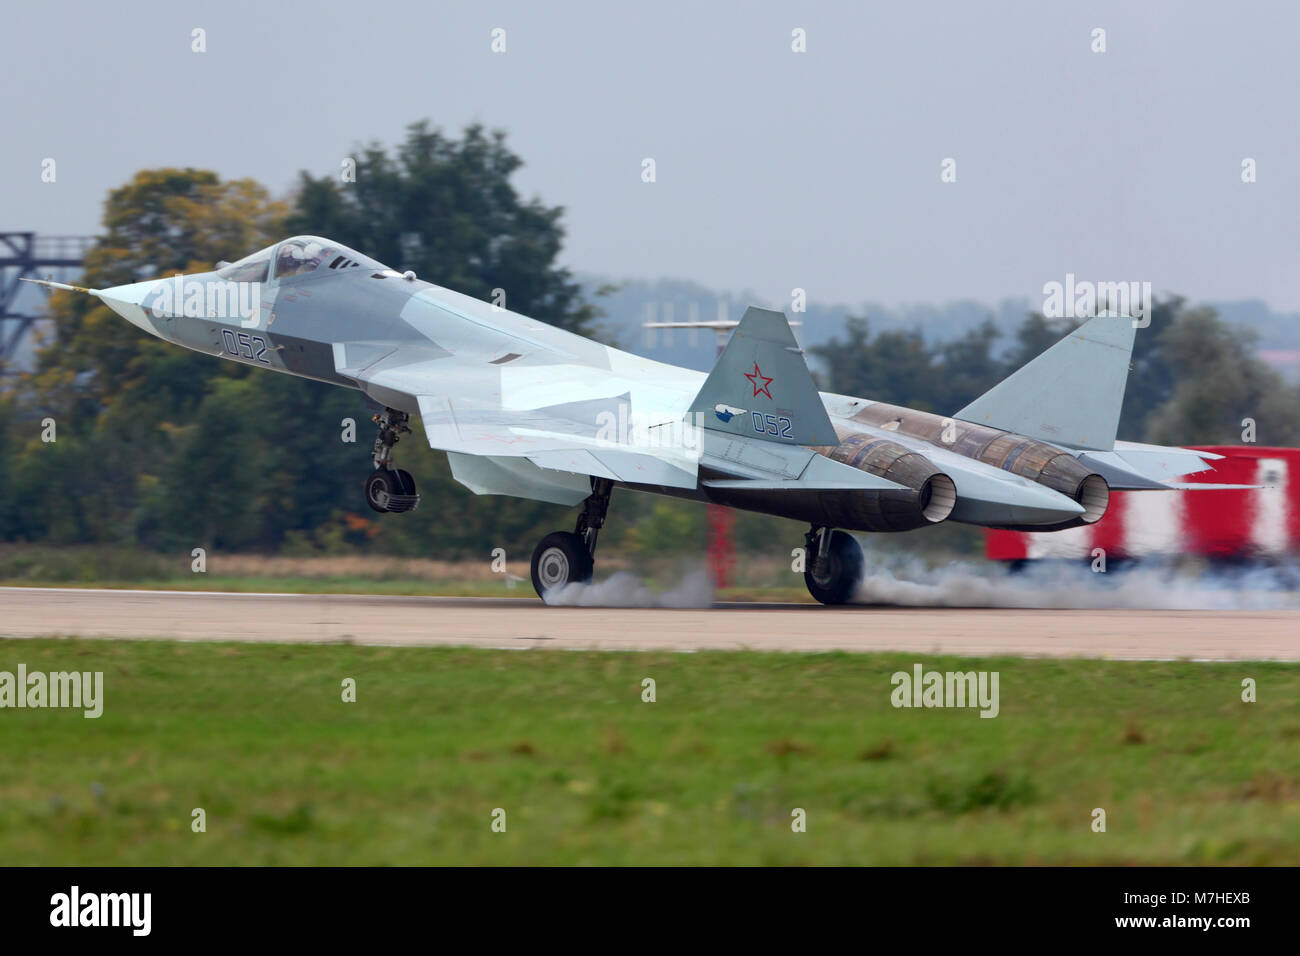 A T-50 PAK-FA fifth generation Russian jet fighter landing in Moscow. Stock Photo